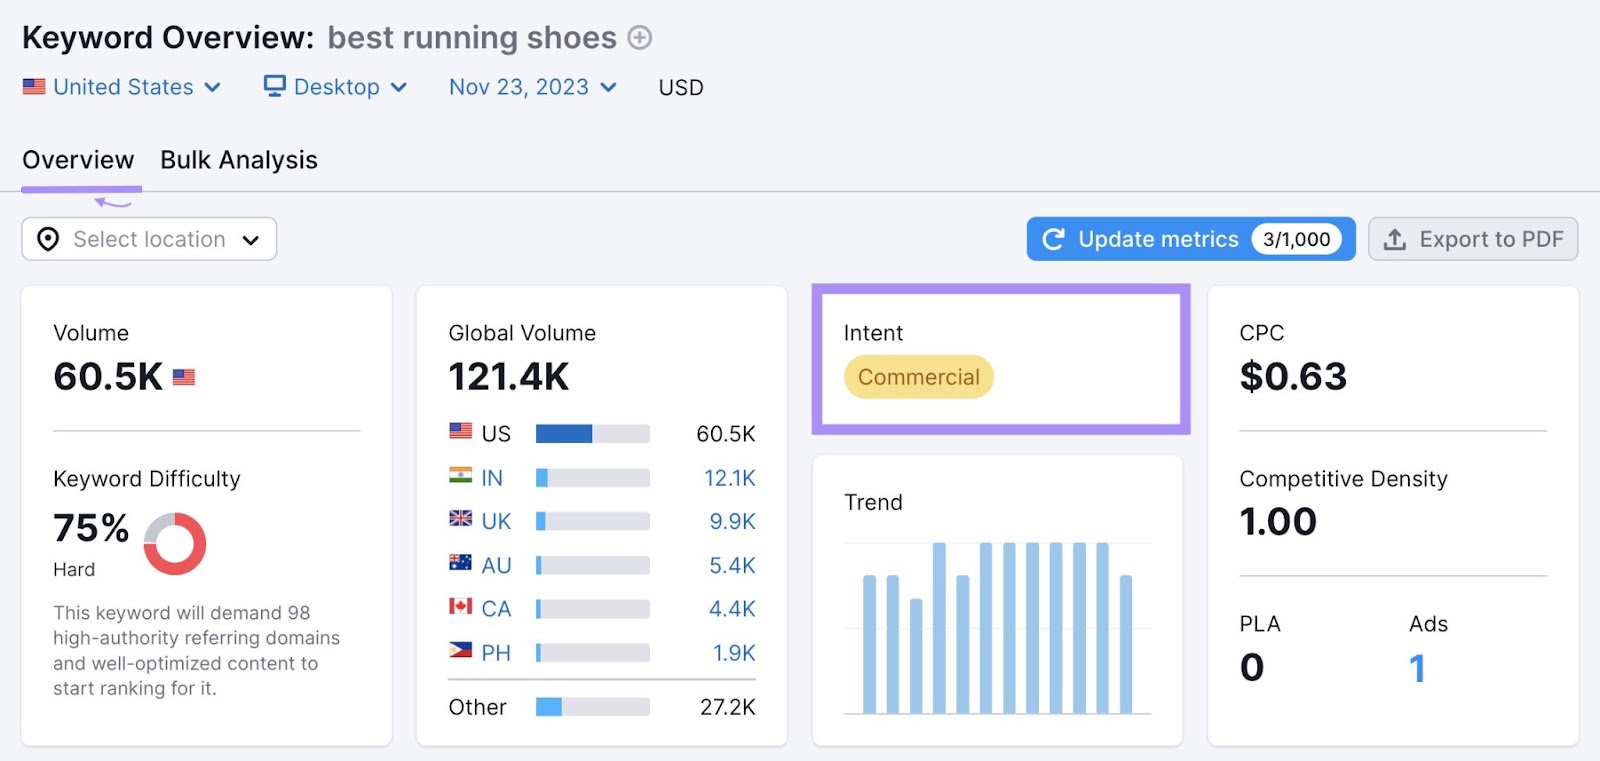 Keyword Overview dashboard for "best running shoes"